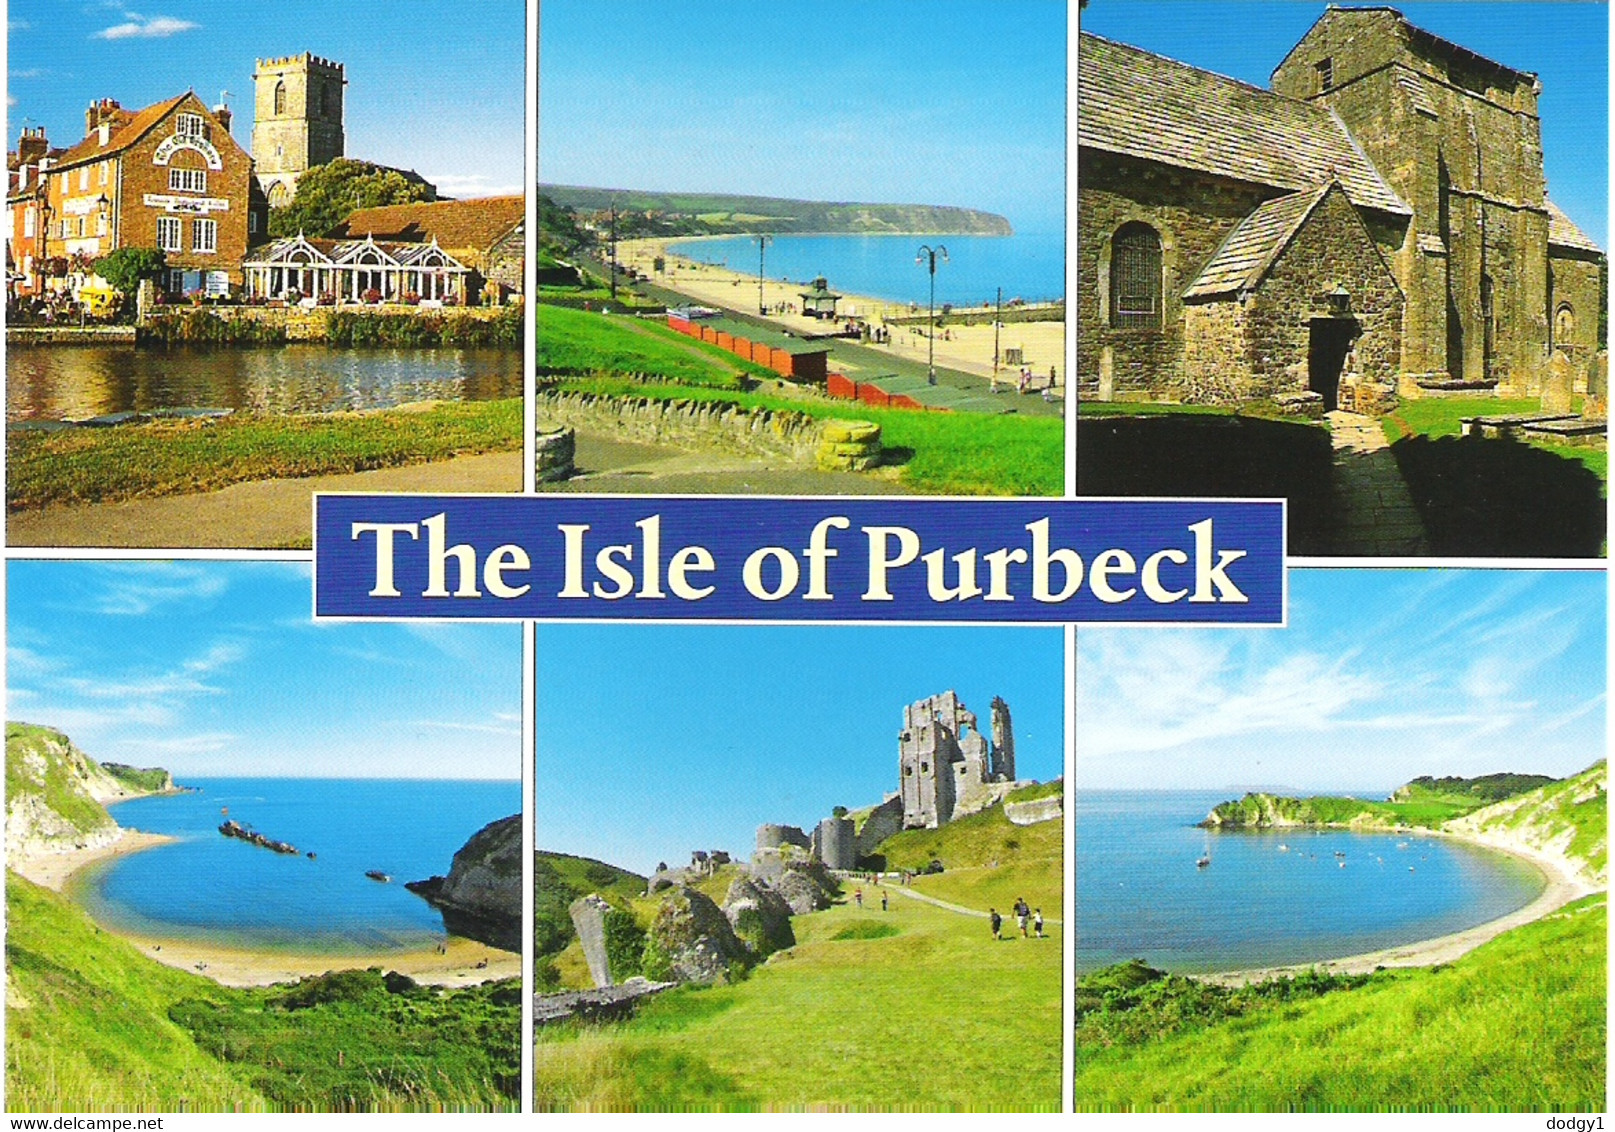 SCENES FROM THE ISLE OF PURBECK, DORSET, ENGLAND. UNUSED POSTCARD Ap5 - Swanage